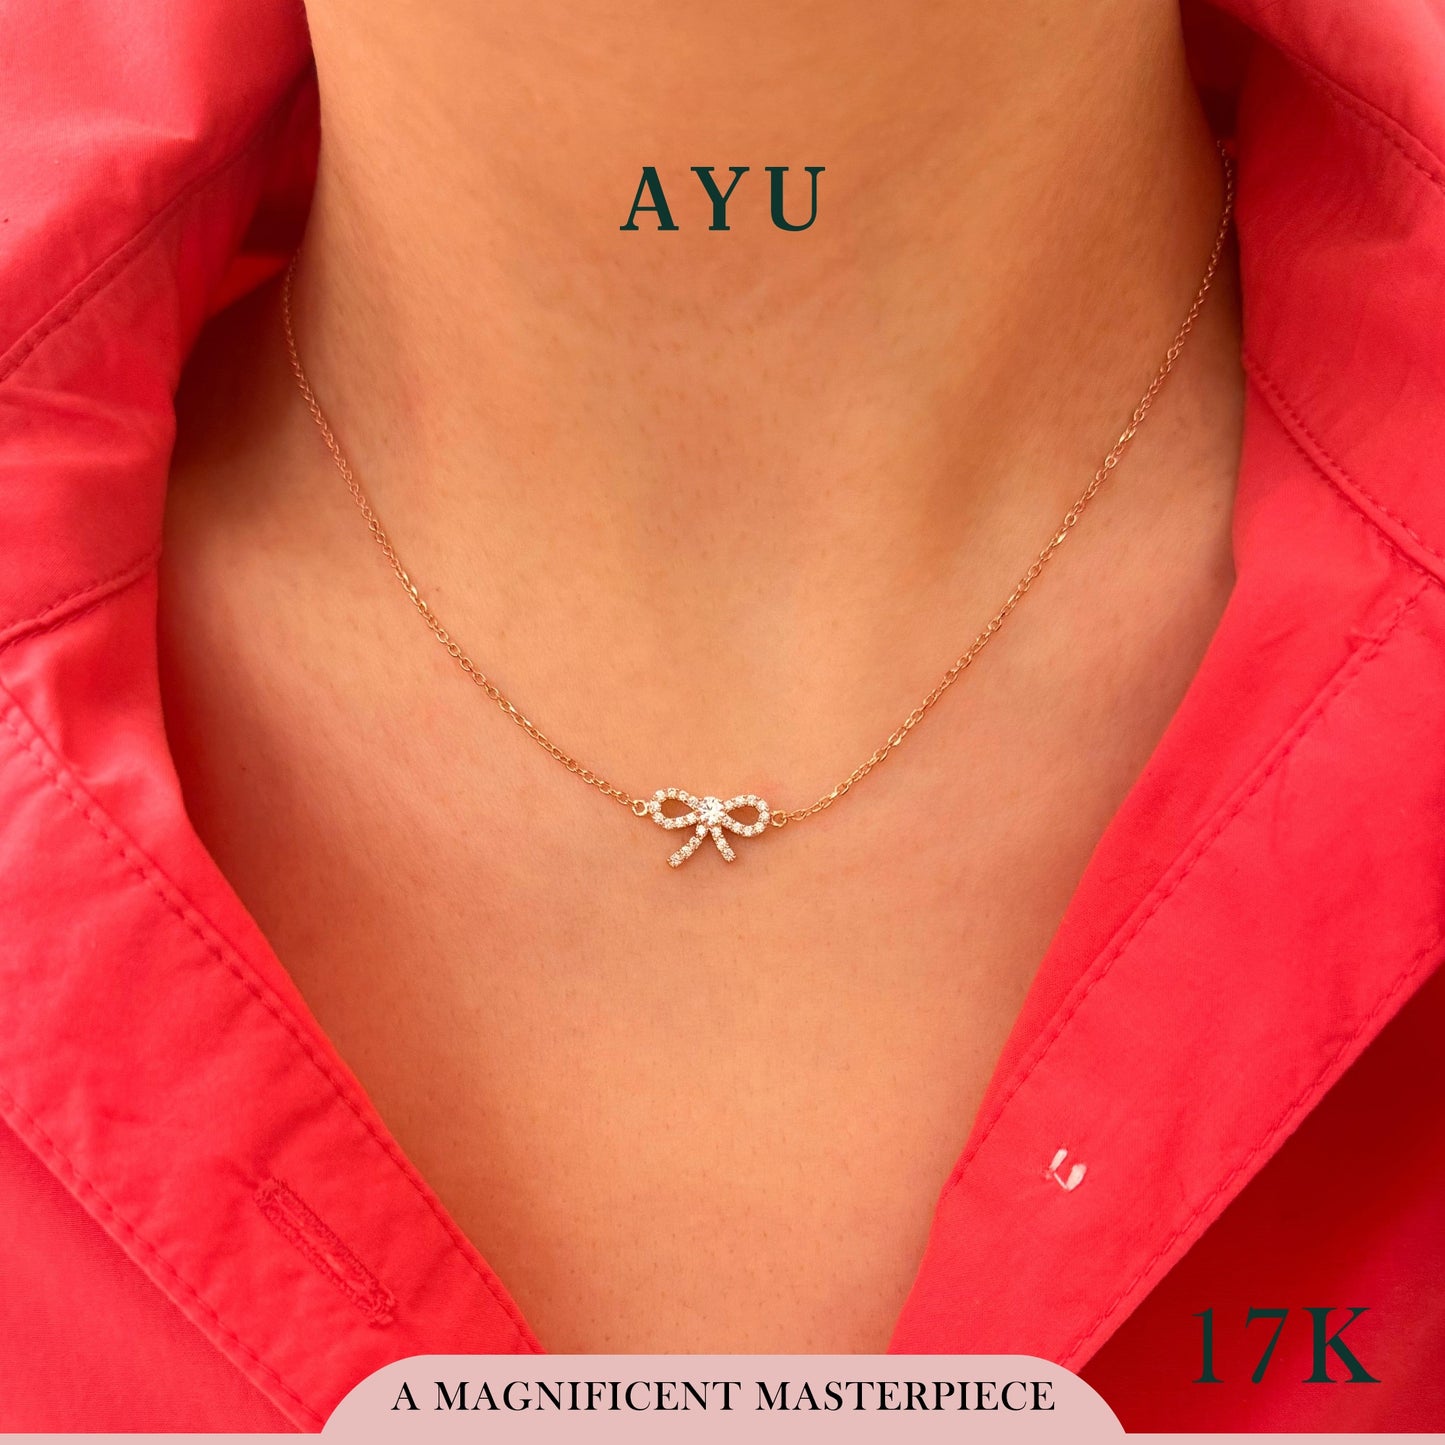 AYU Kalung Emas-Twinkle Pave Ribbon Chain Necklace 17k Rose Gold